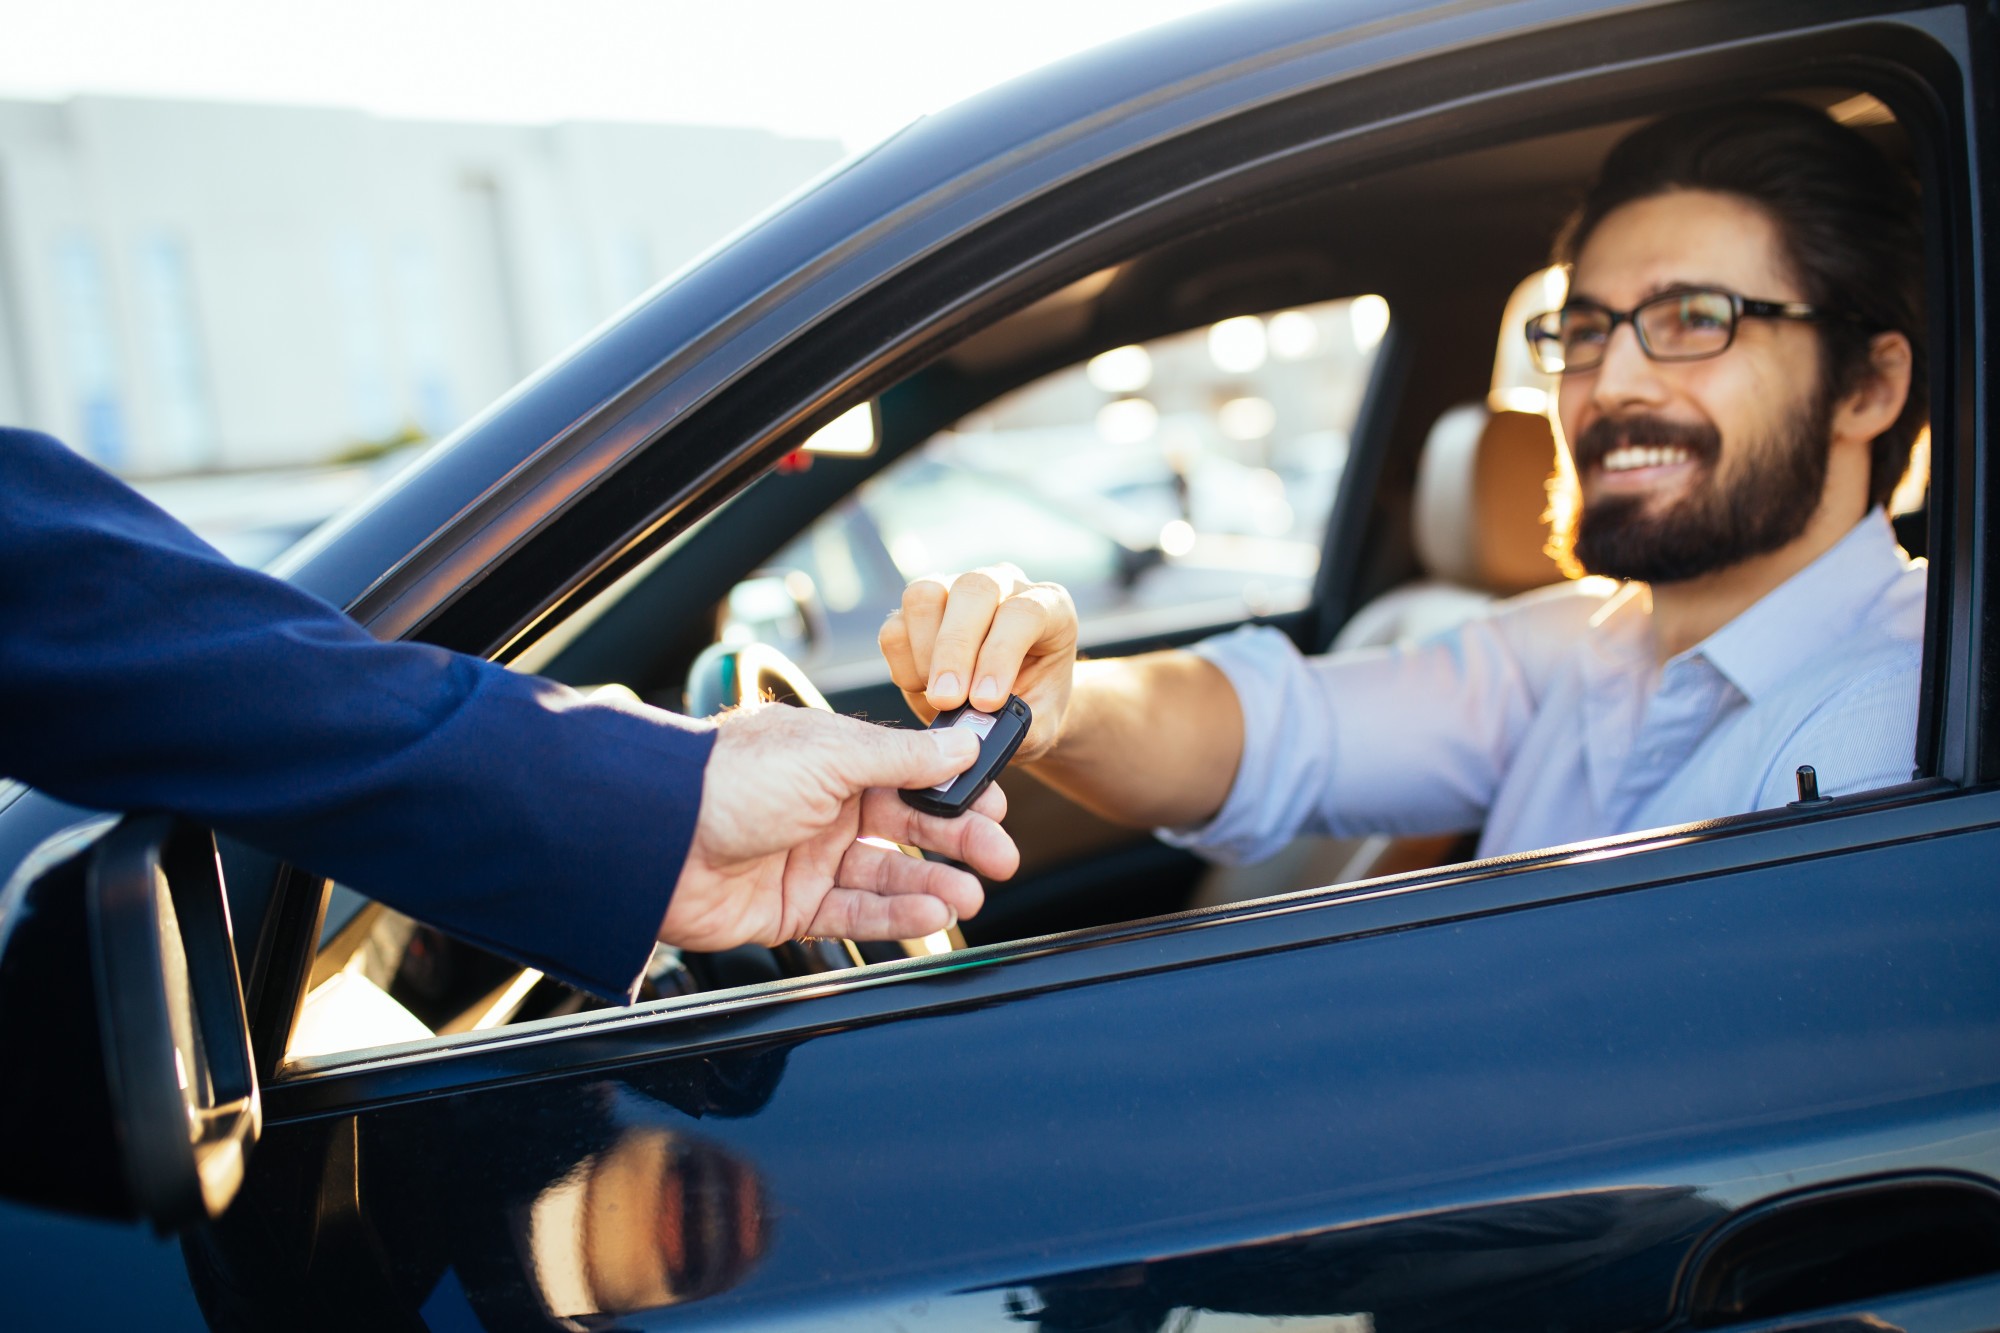 7 Common Mistakes When Selling a Used Car and How to Avoid Them